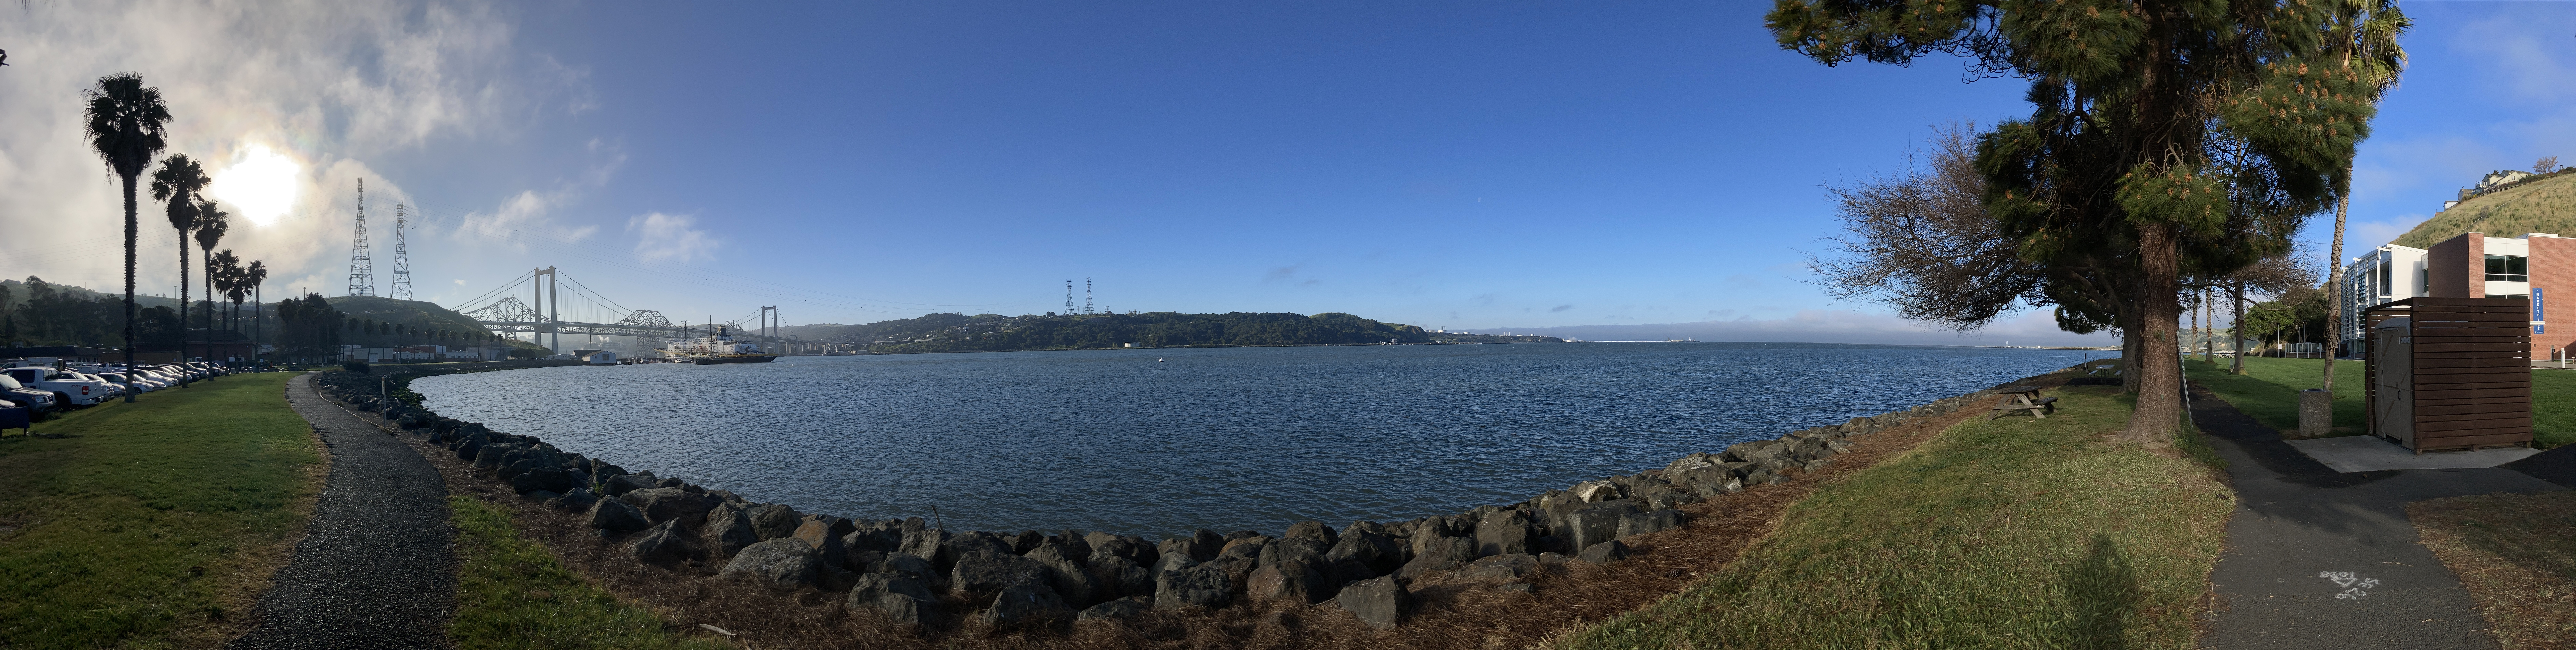 Panoramic Waterfront View of campus